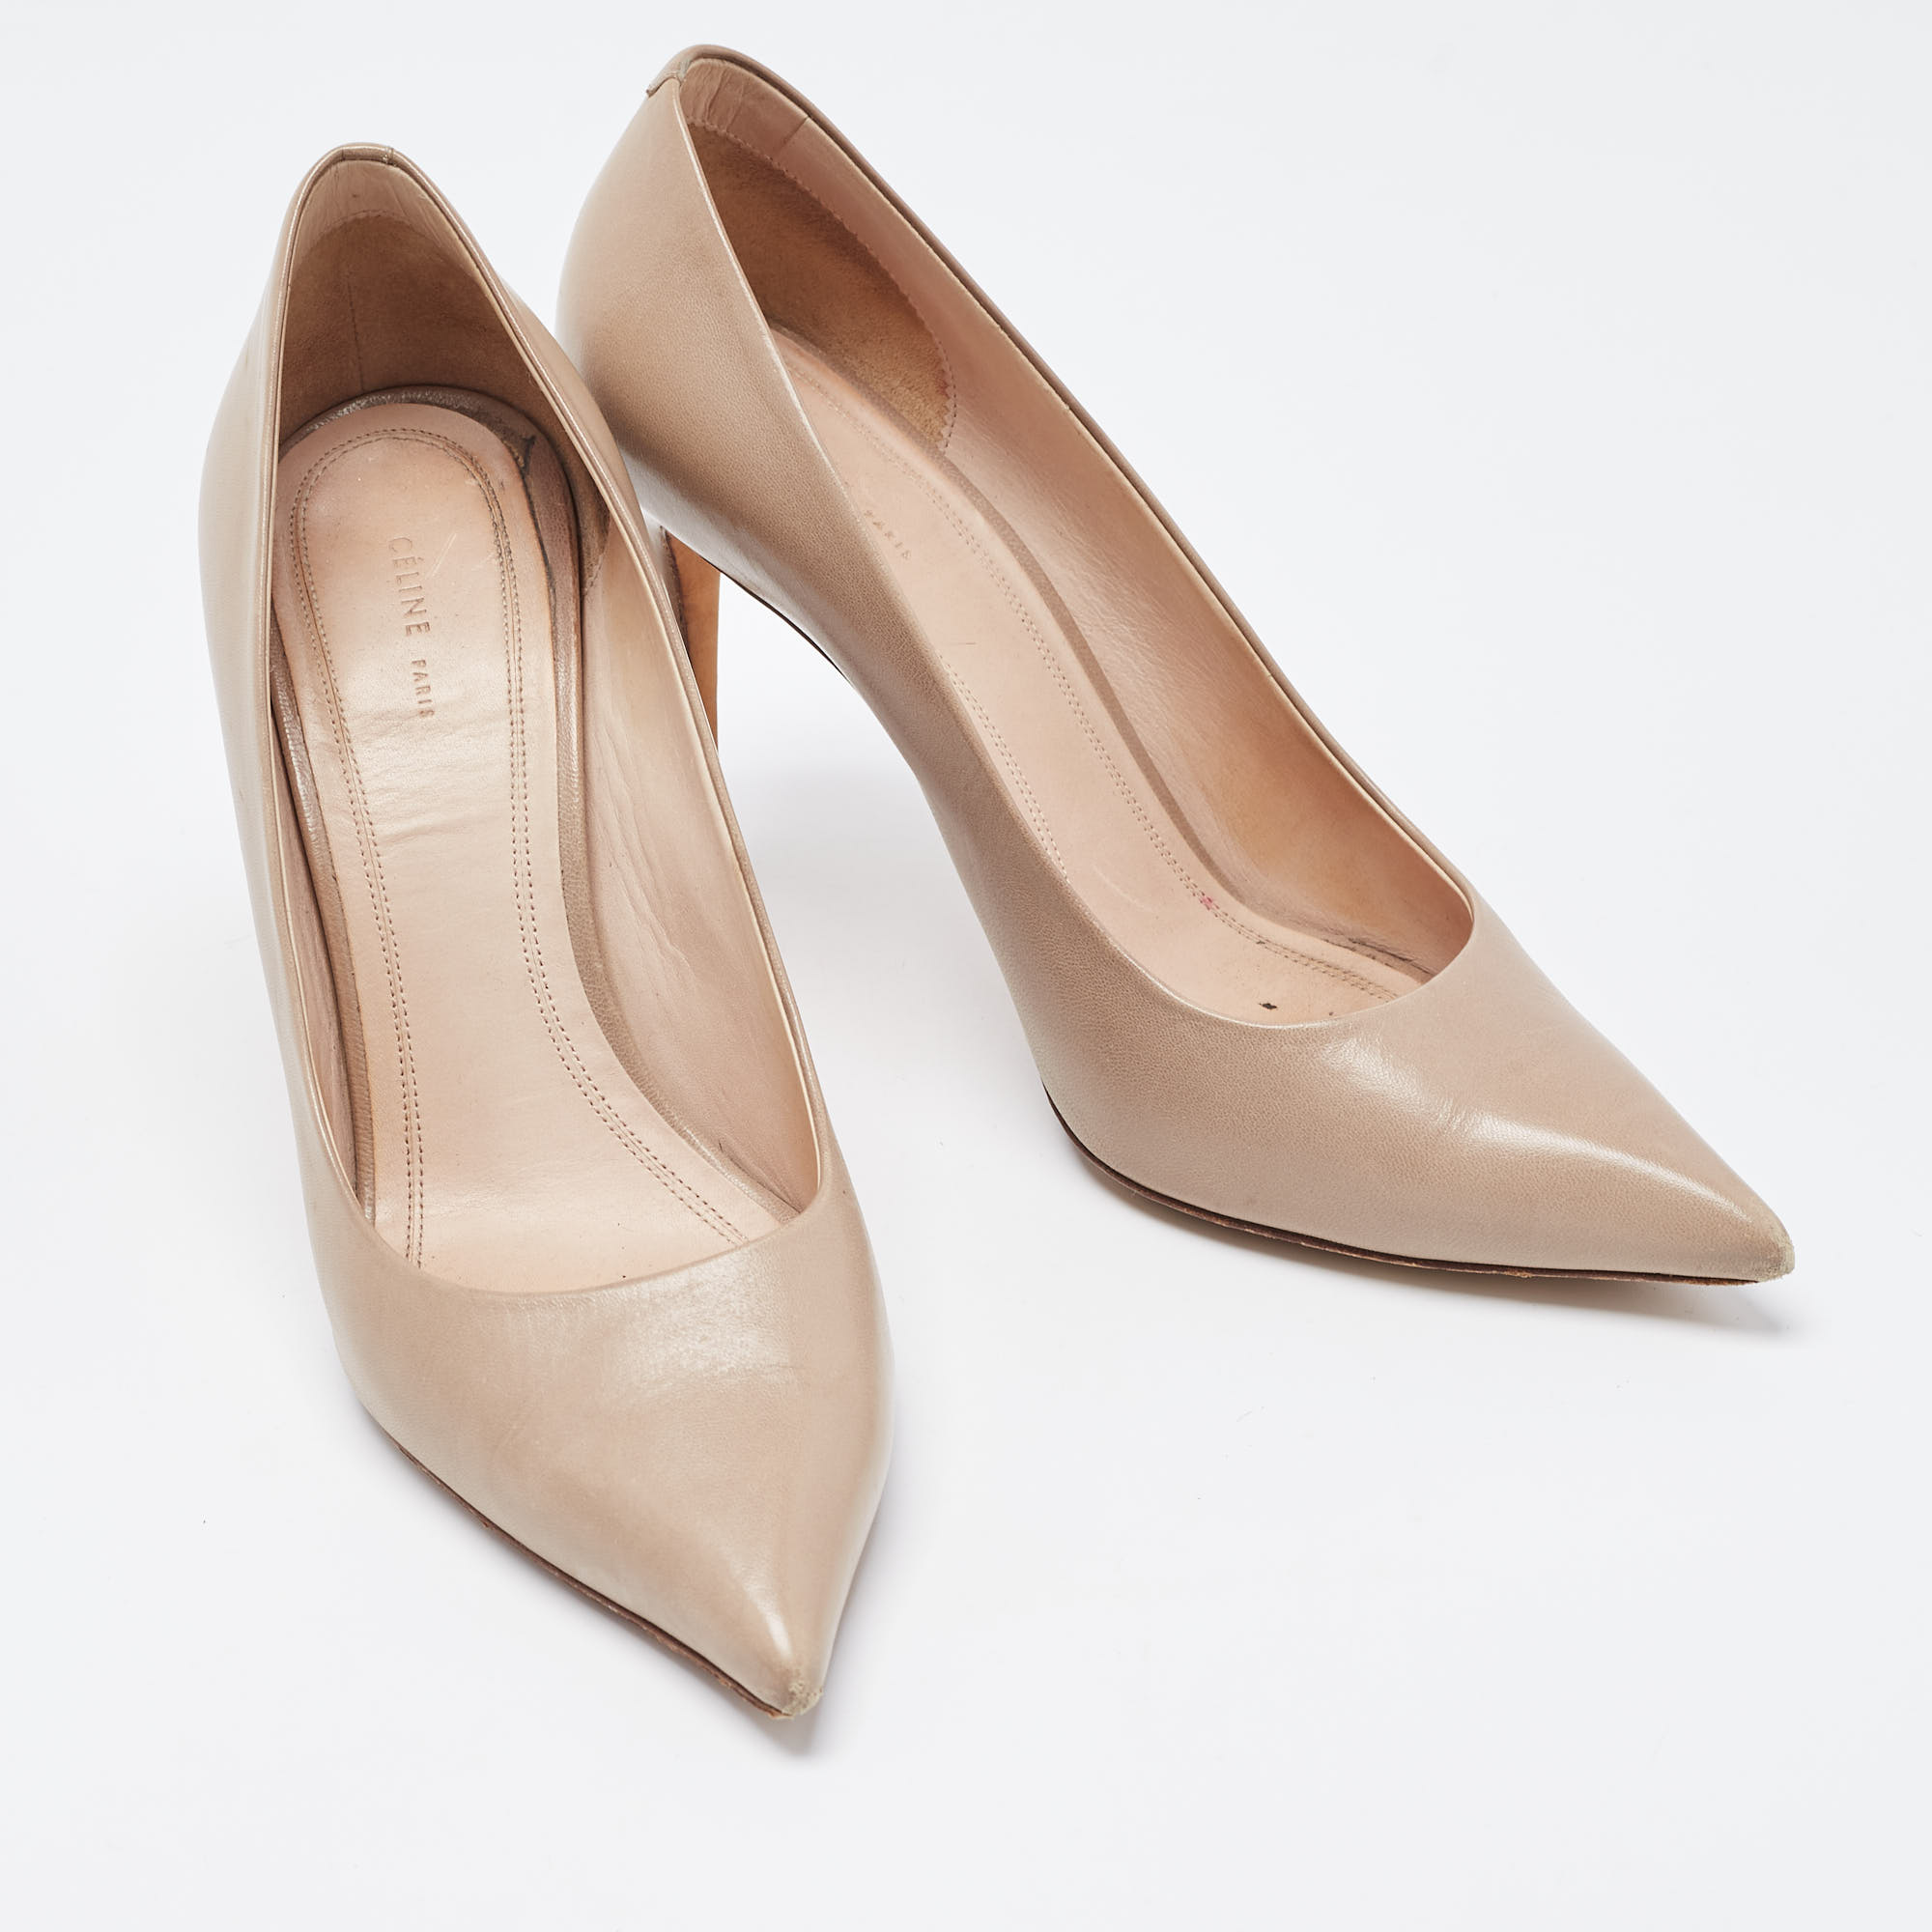 Celine Light Brown Leather Pointed Toe Pumps Size 37